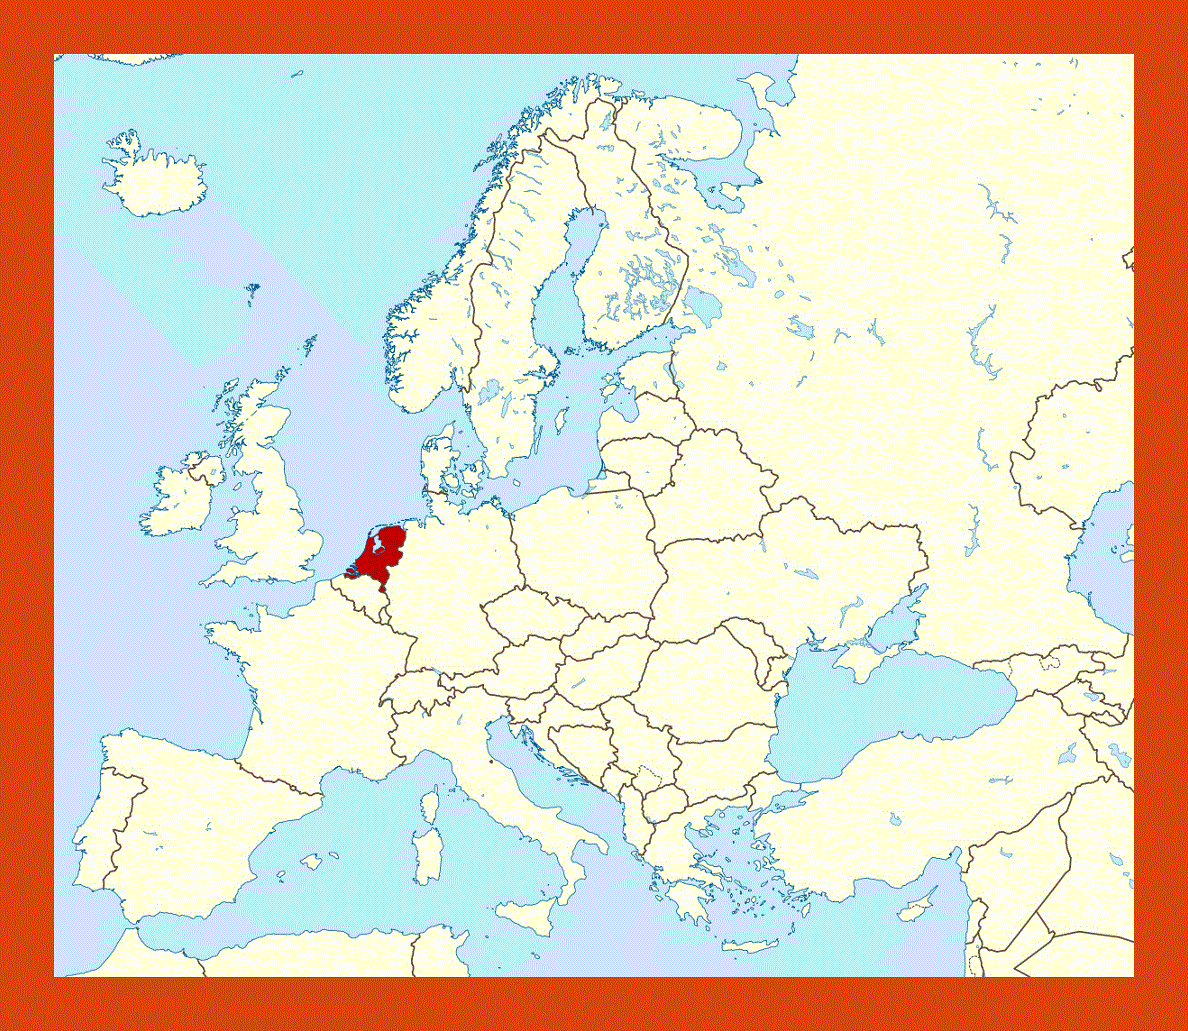 Location map of Netherlands in Europe